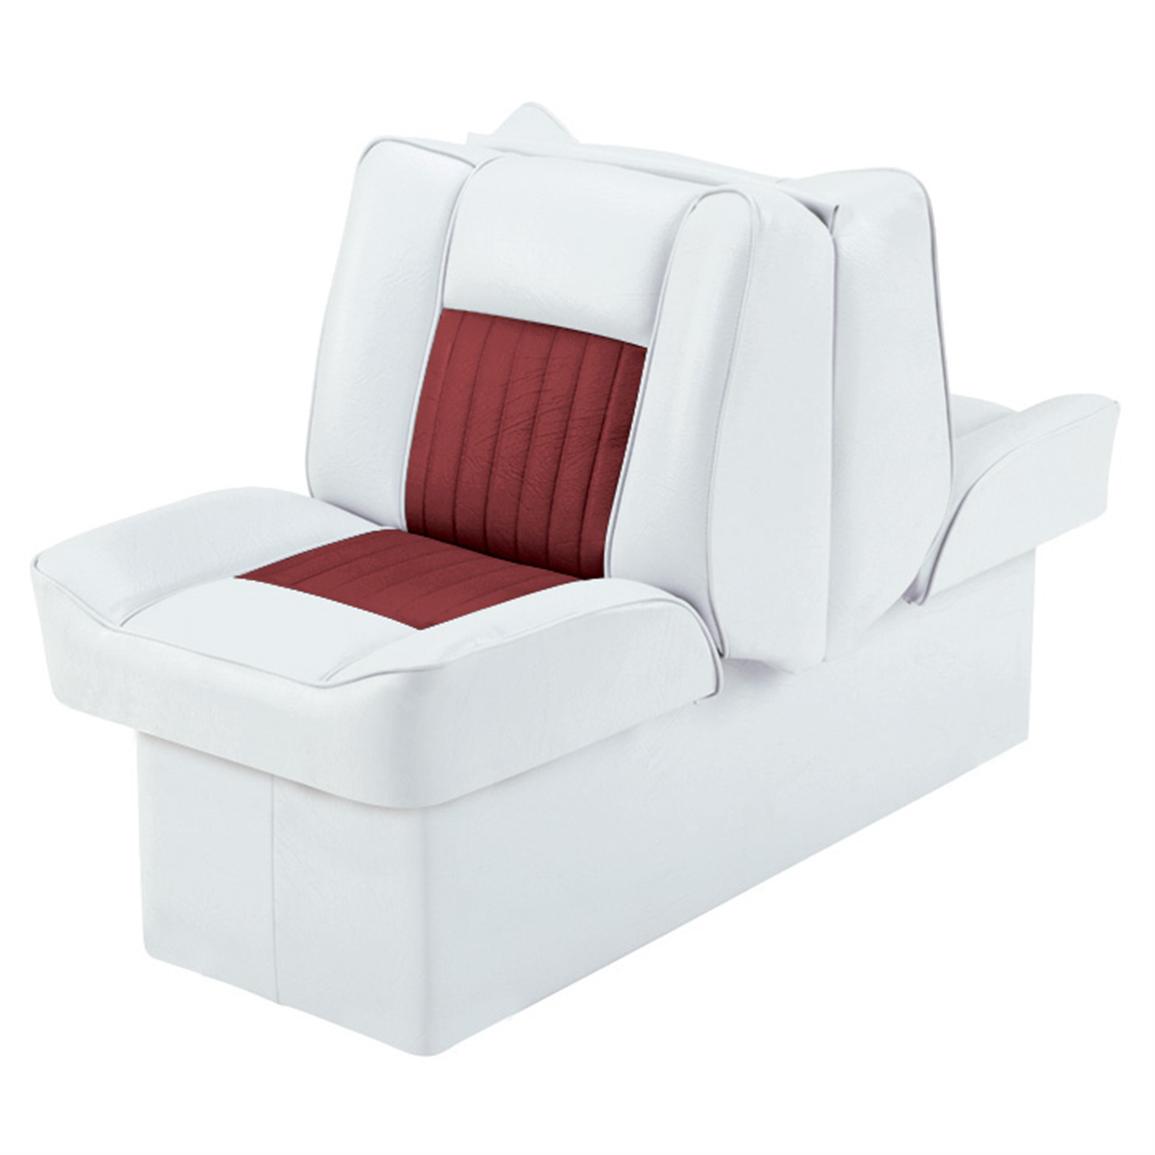 Wise Bucket Style 10 Base Runabout Lounge Seat 